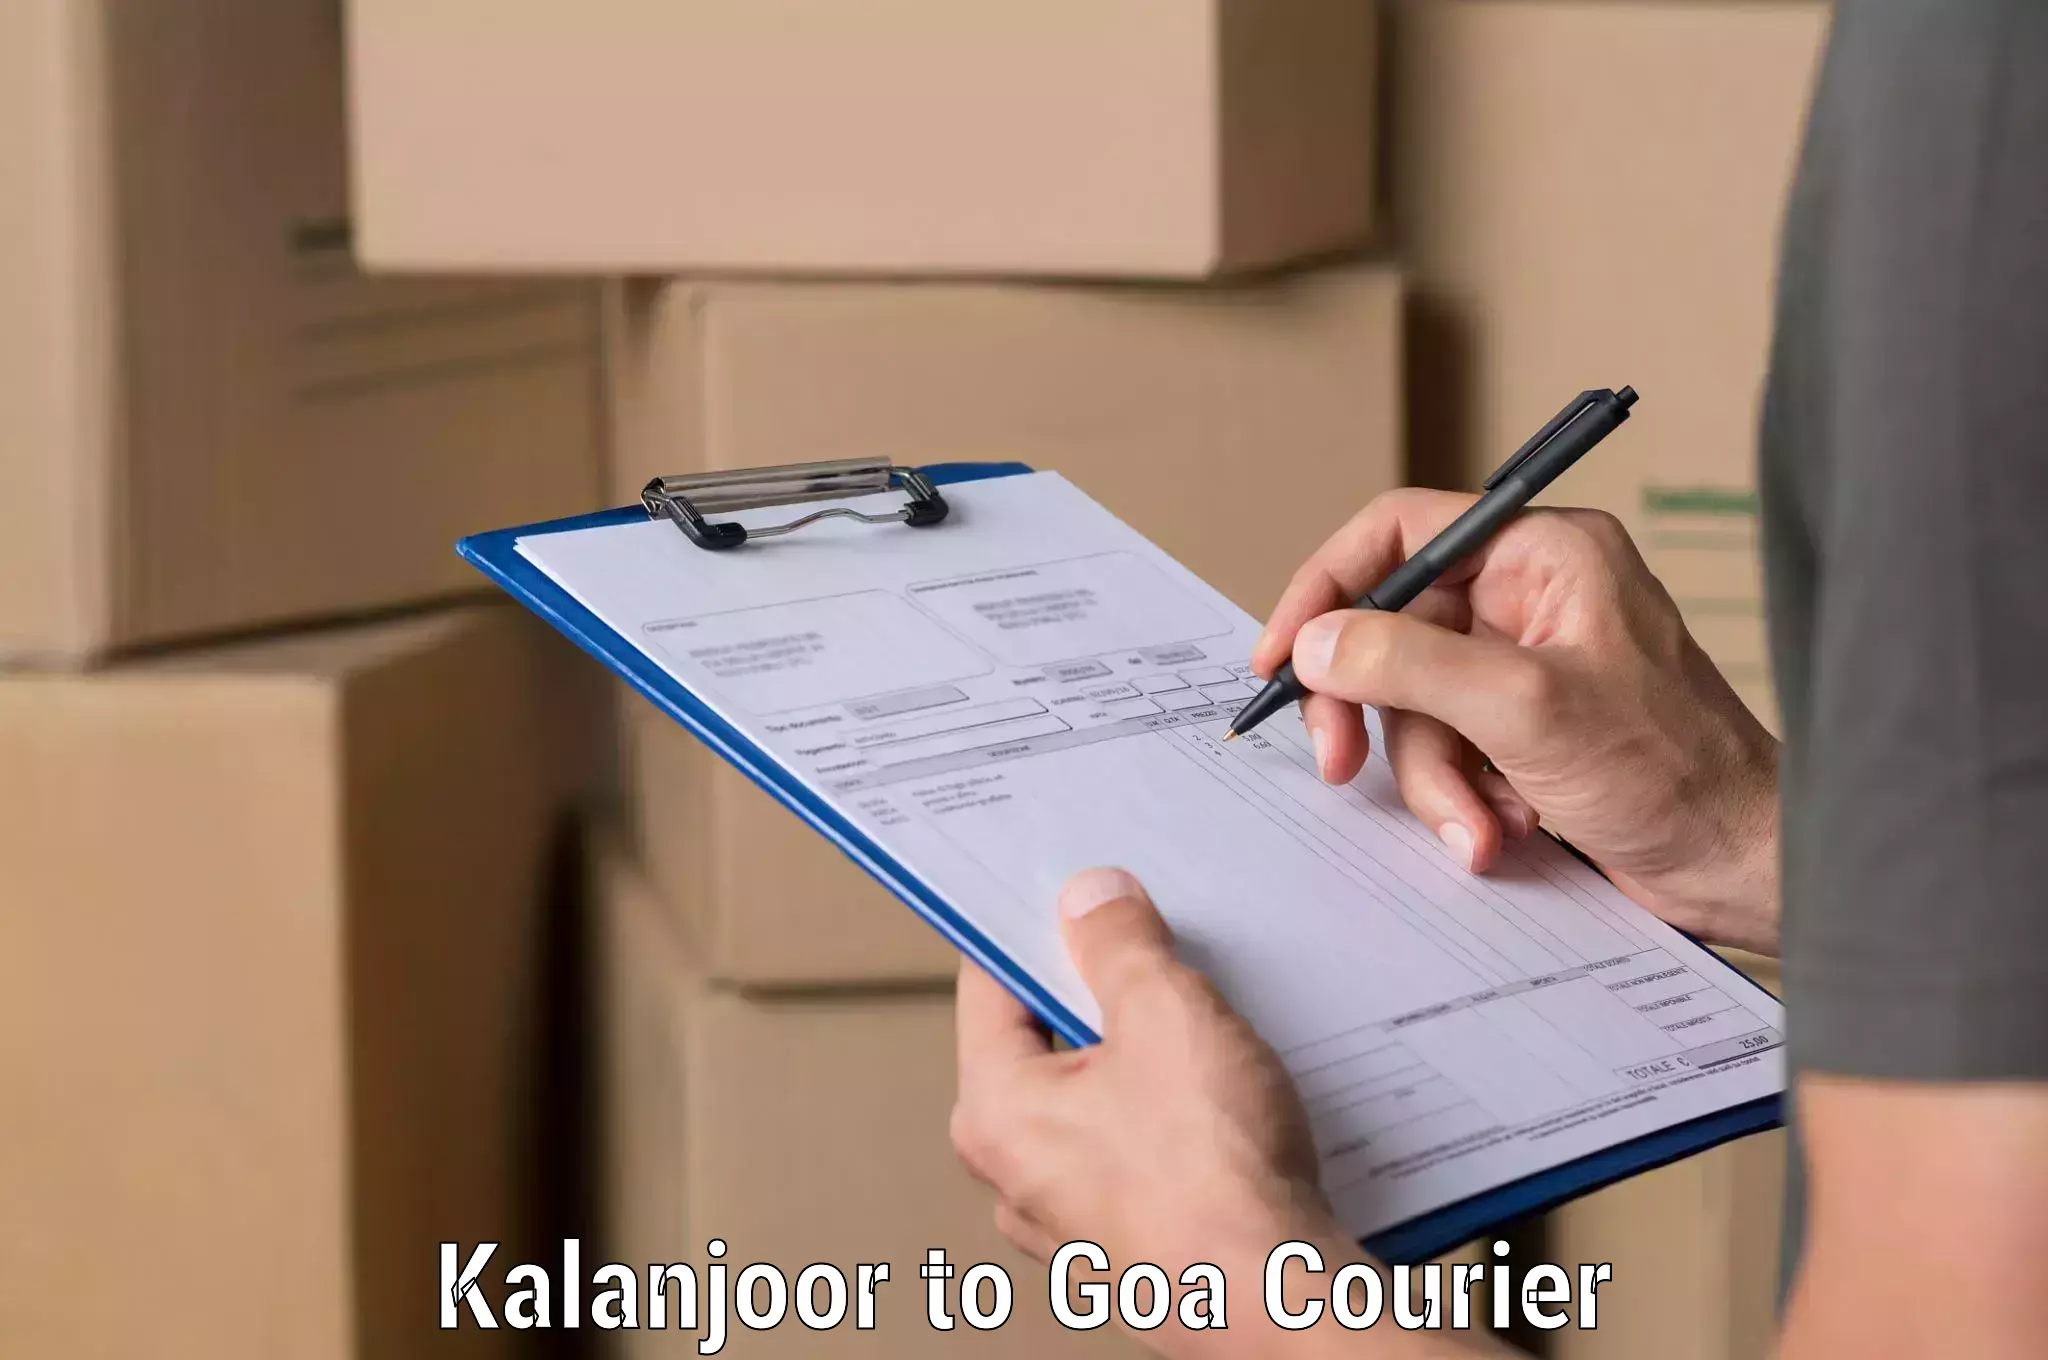 Sustainable shipping practices Kalanjoor to Goa